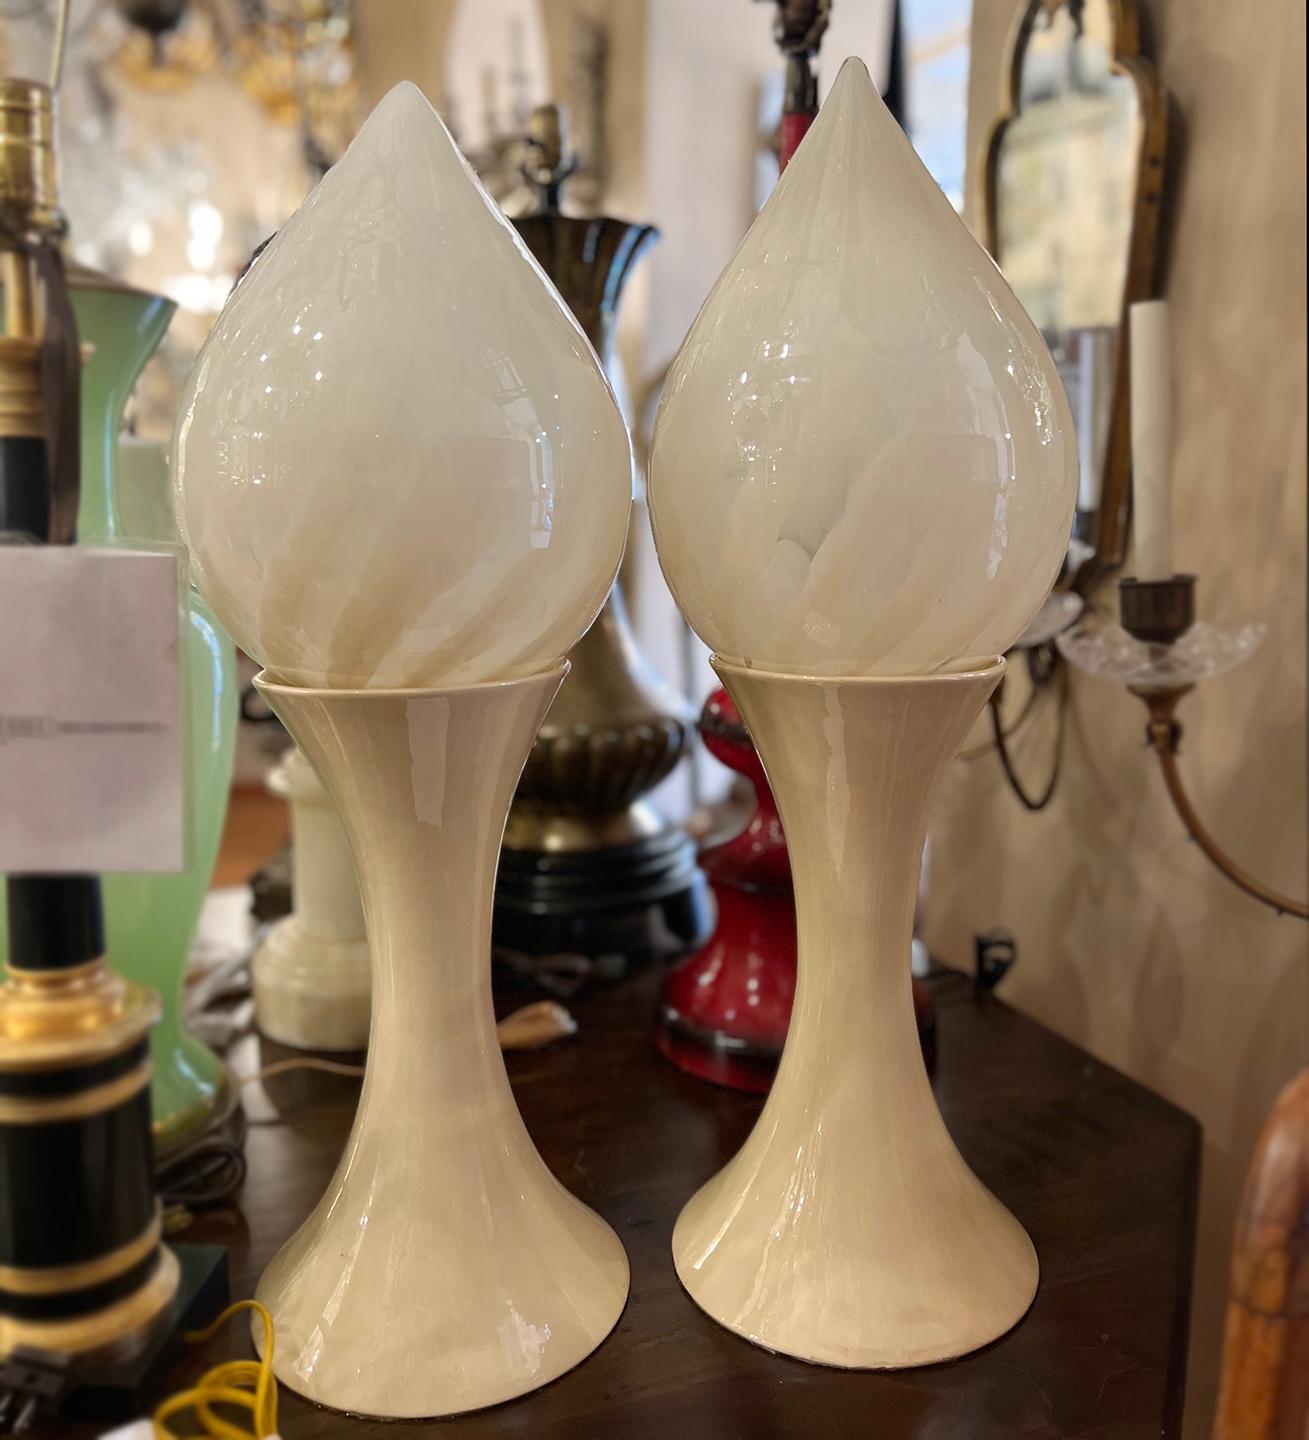 Pair of Italian circa 1960's moderne style porcelain lamps with handblown art glass shades.

Measurements:
Height: 25.5